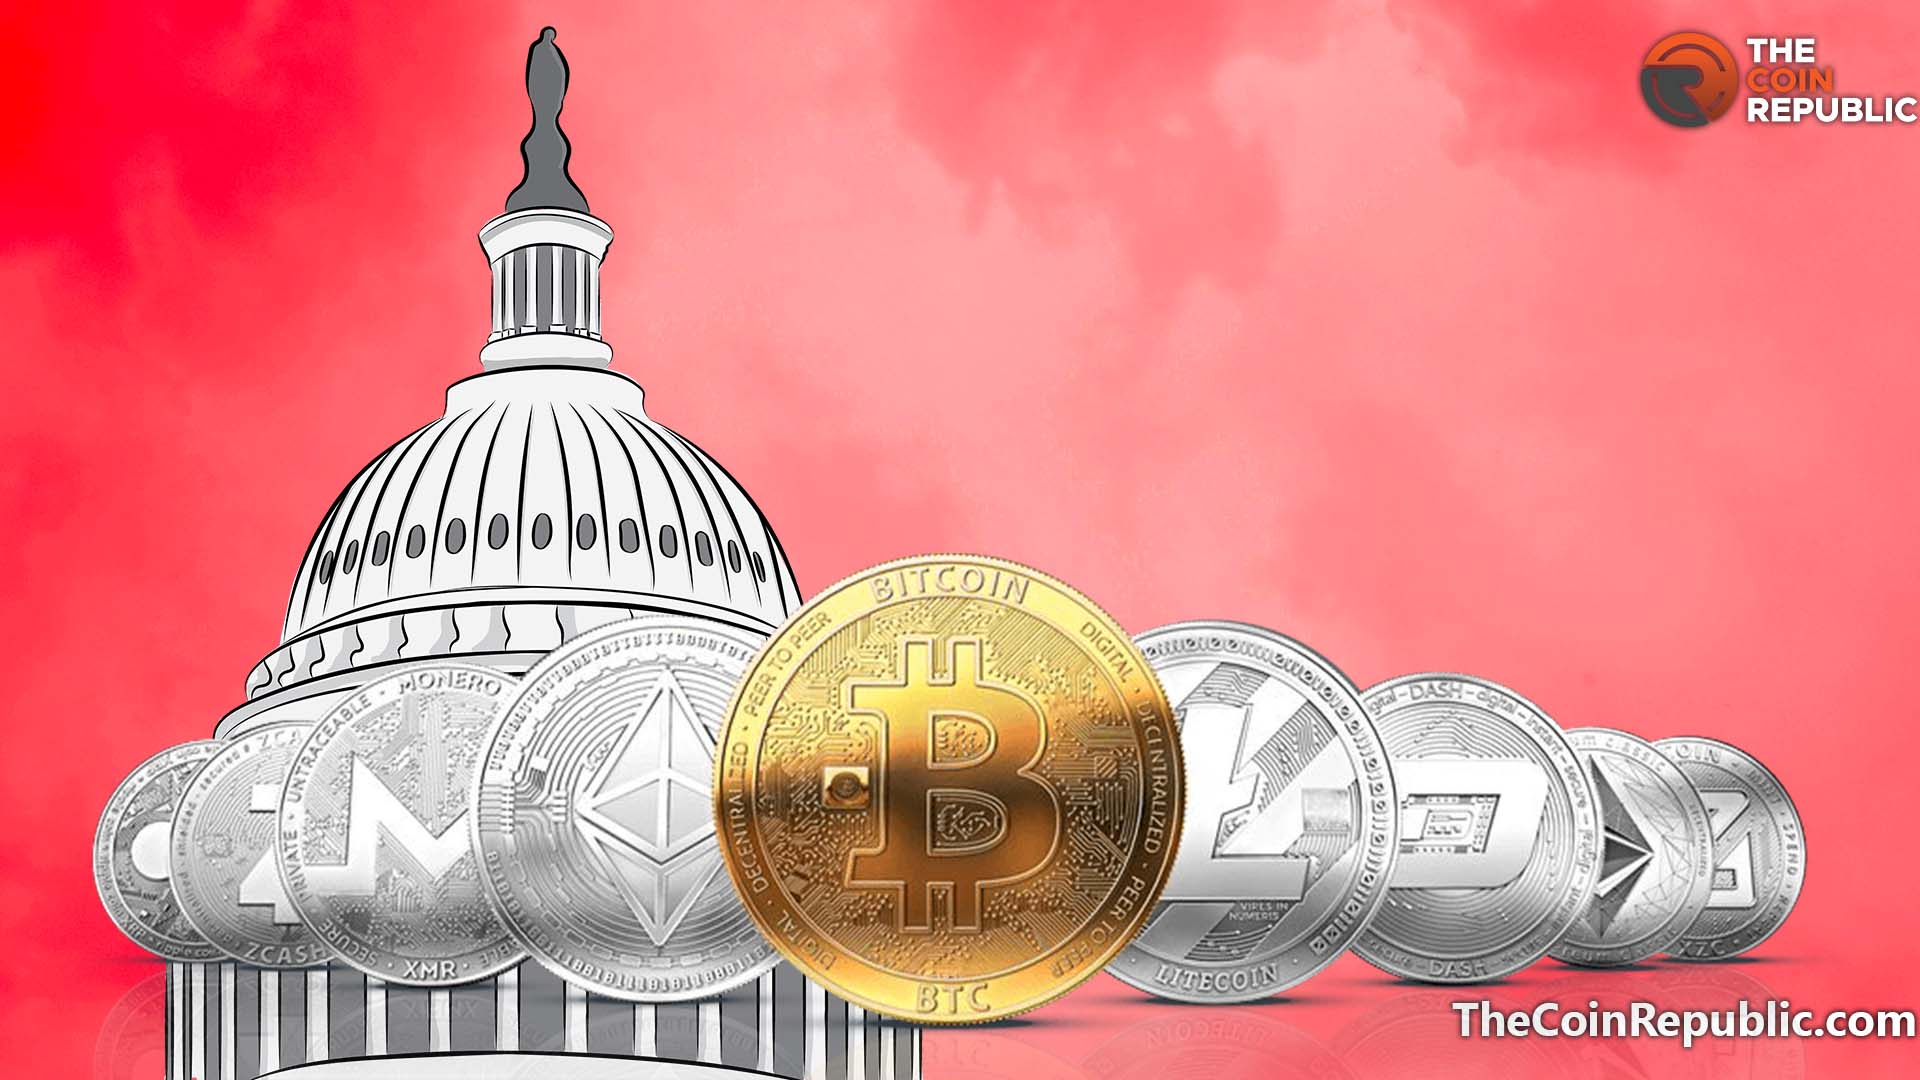 US Representative Comes Up With Crypto Innovation Bill Again